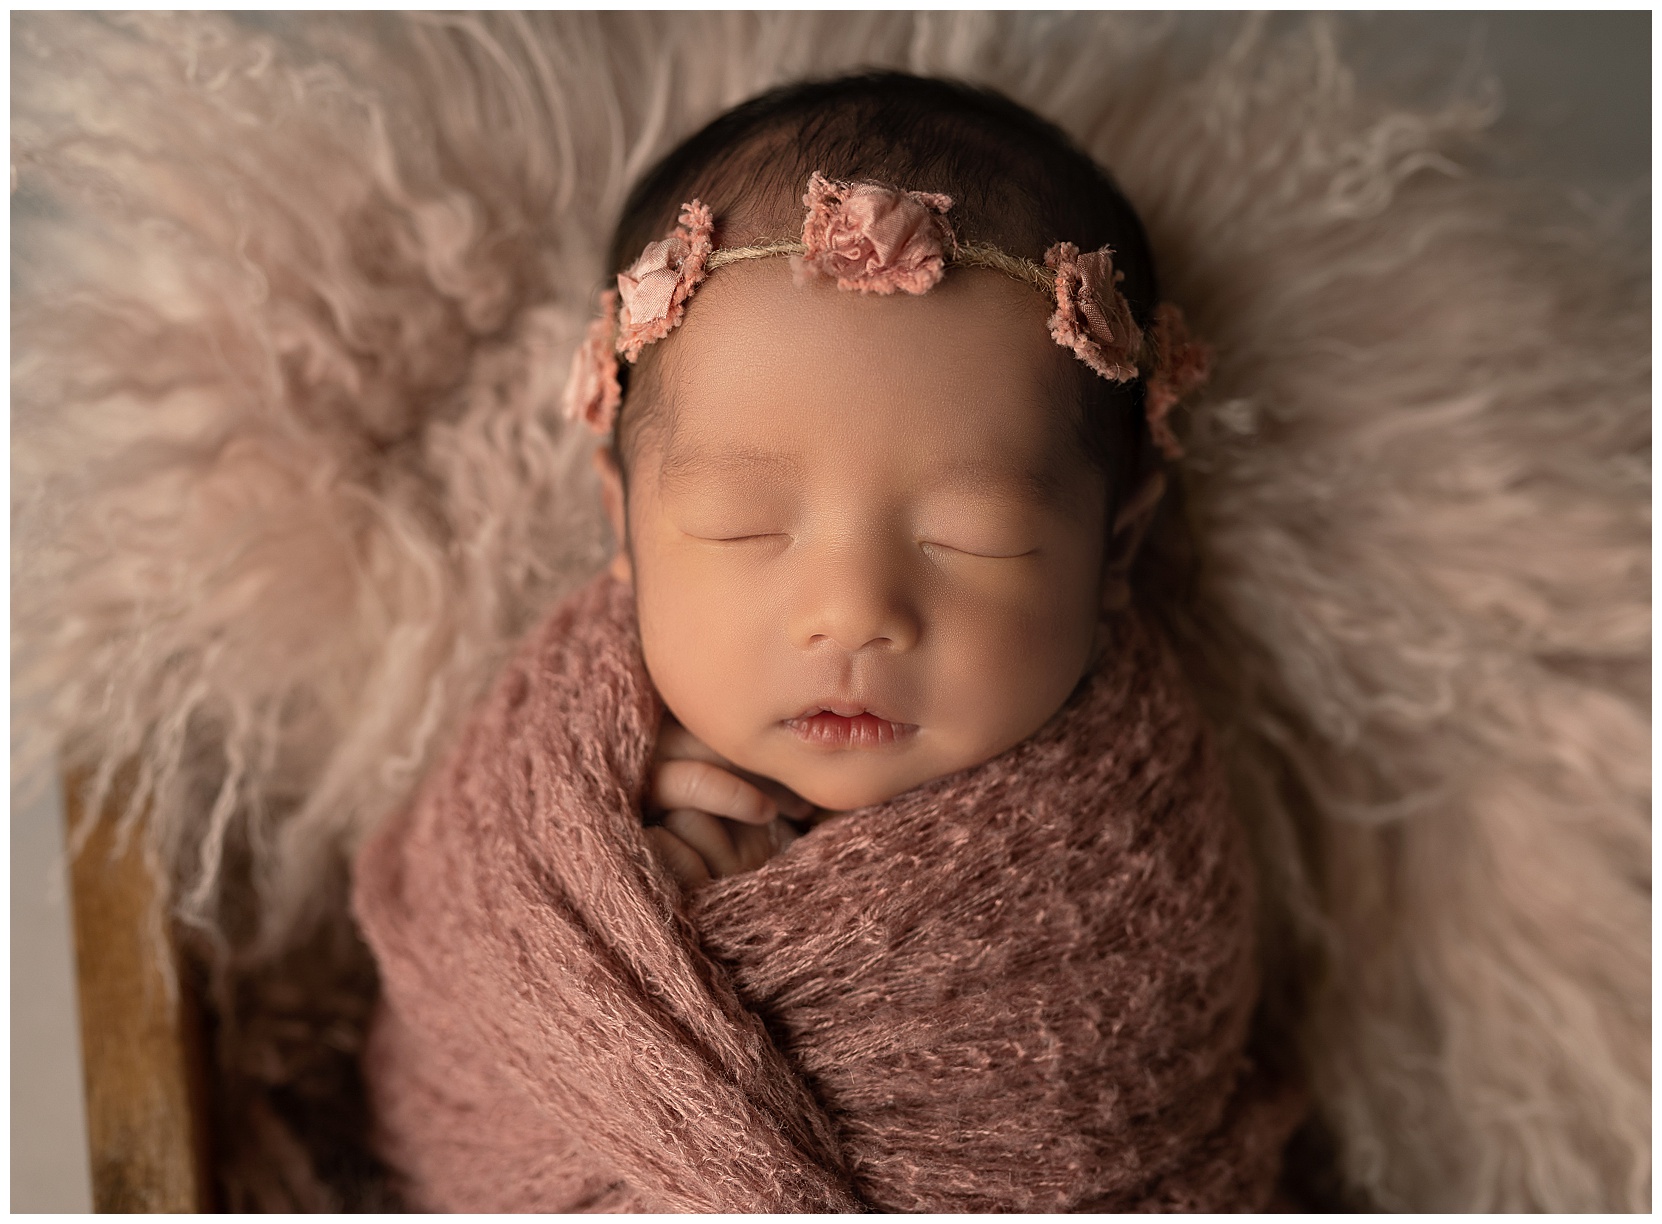 Close-up of a newborn wearing a pink flower crown, wrapped in a soft pink knit shawl on a sheepskin background